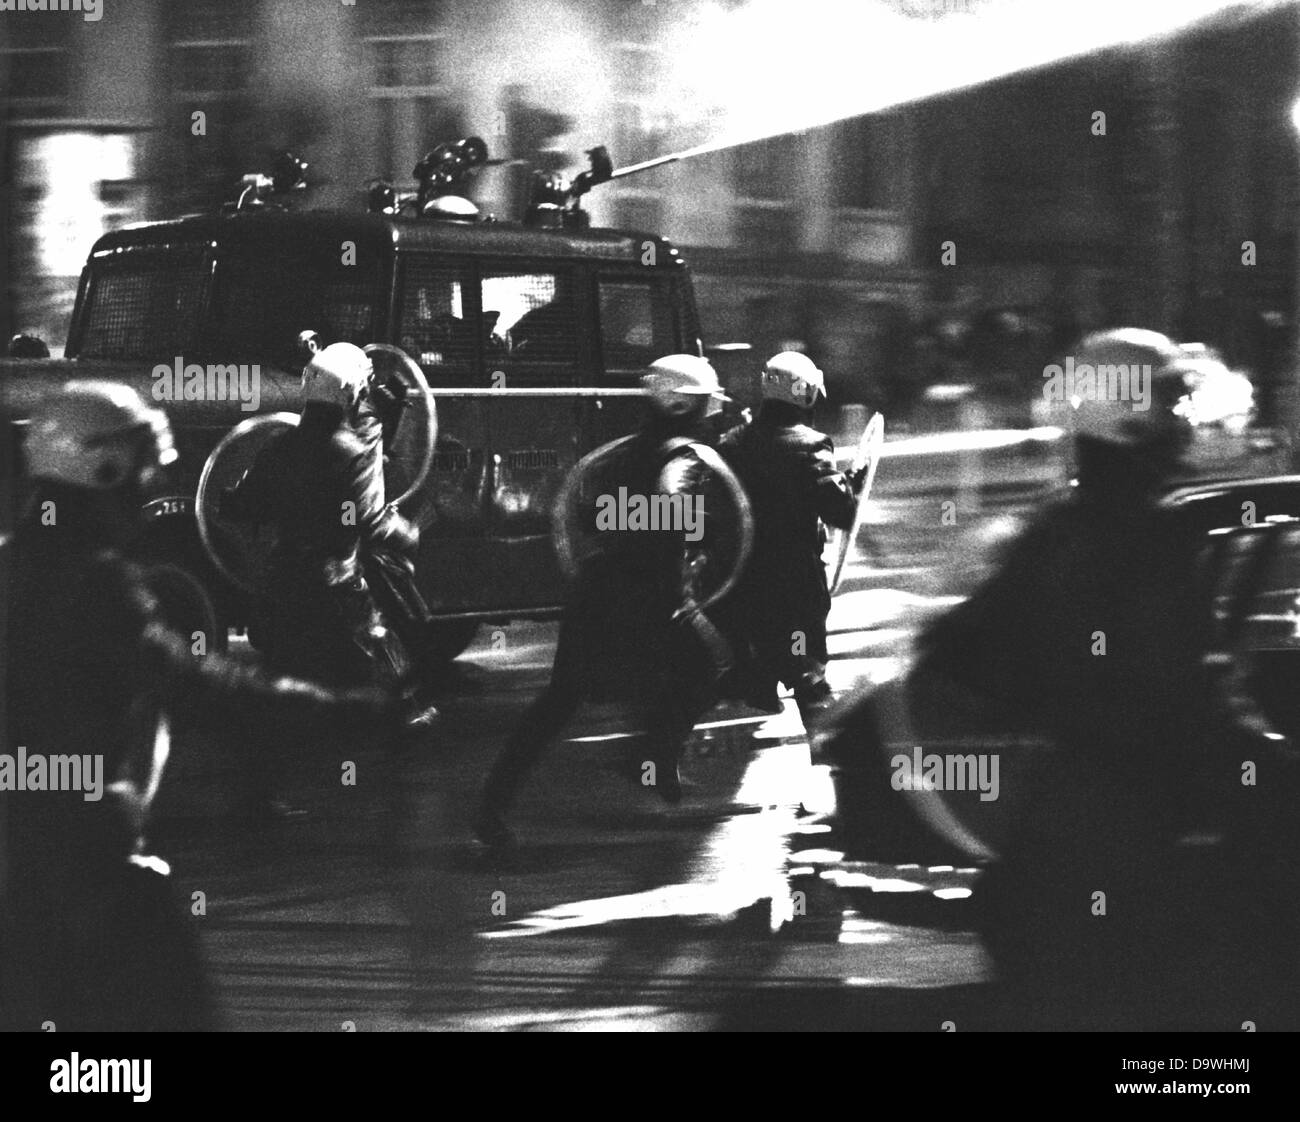 Police forces vacate four occupied houses in Frankfurt on the 21st of February in 1974. Stock Photo